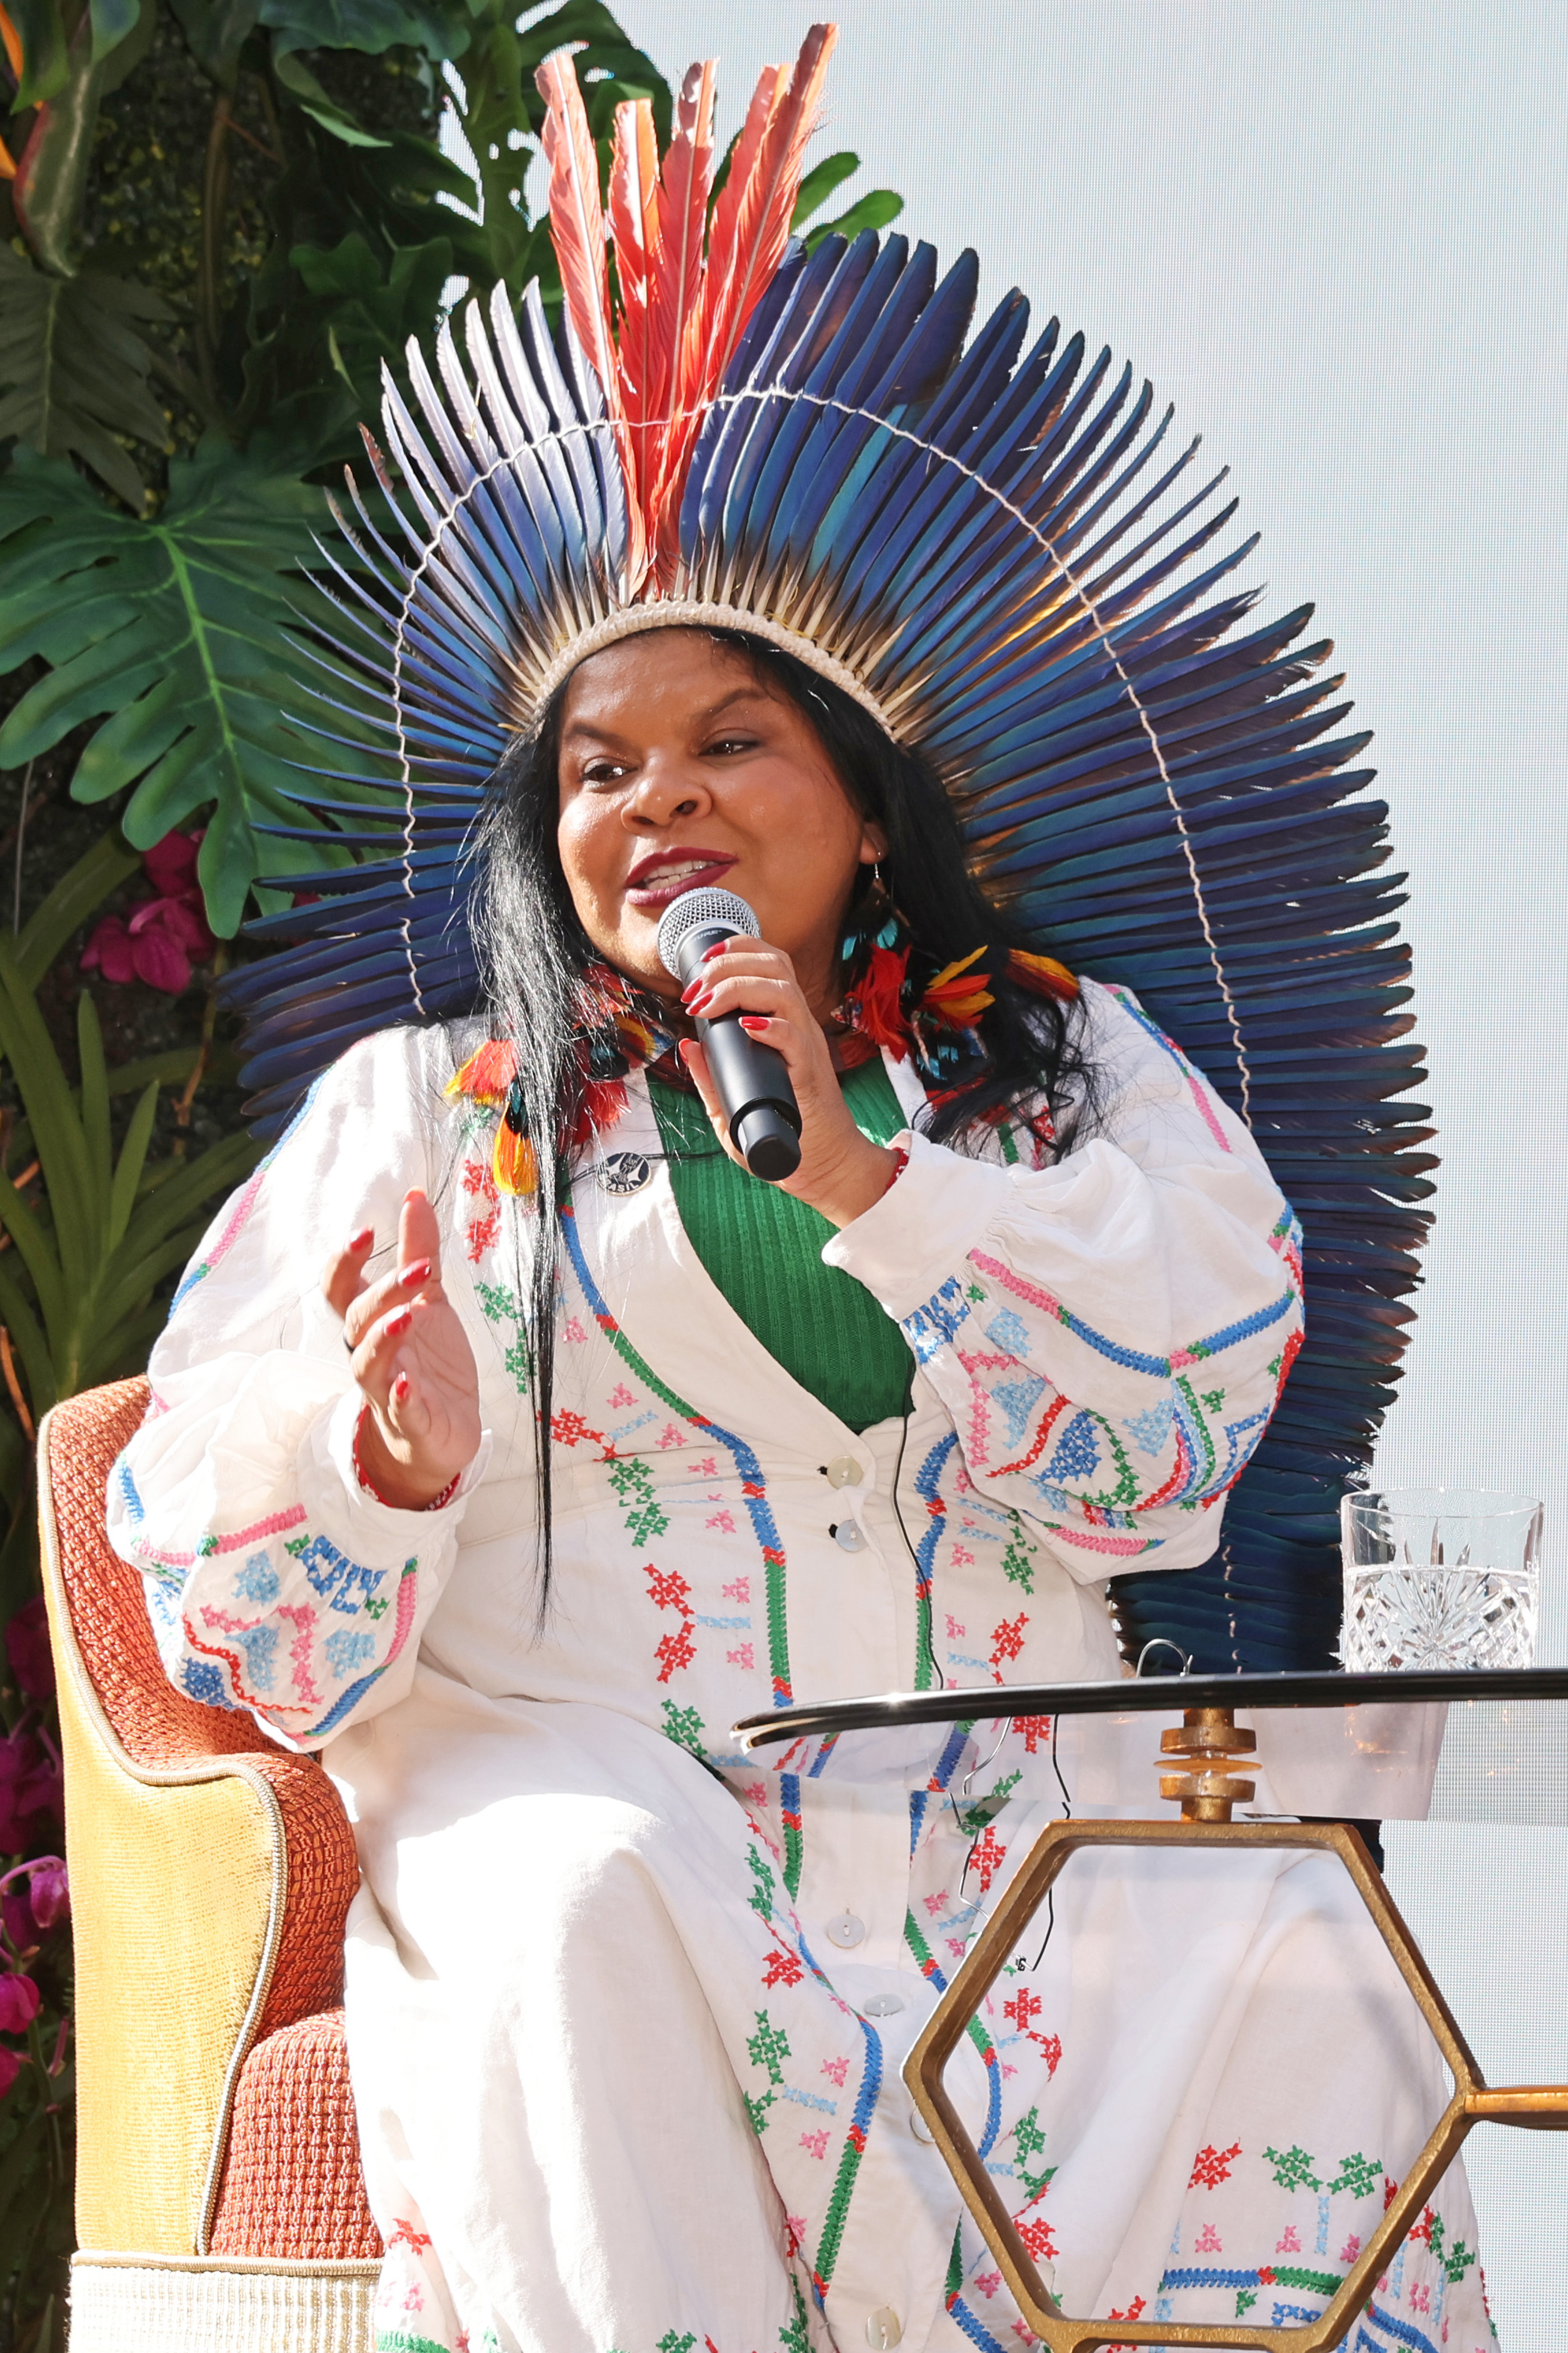 Brazil’s Minister of Indigenous Peoples on Land Rights, the Climate Emergency and Empowering Women